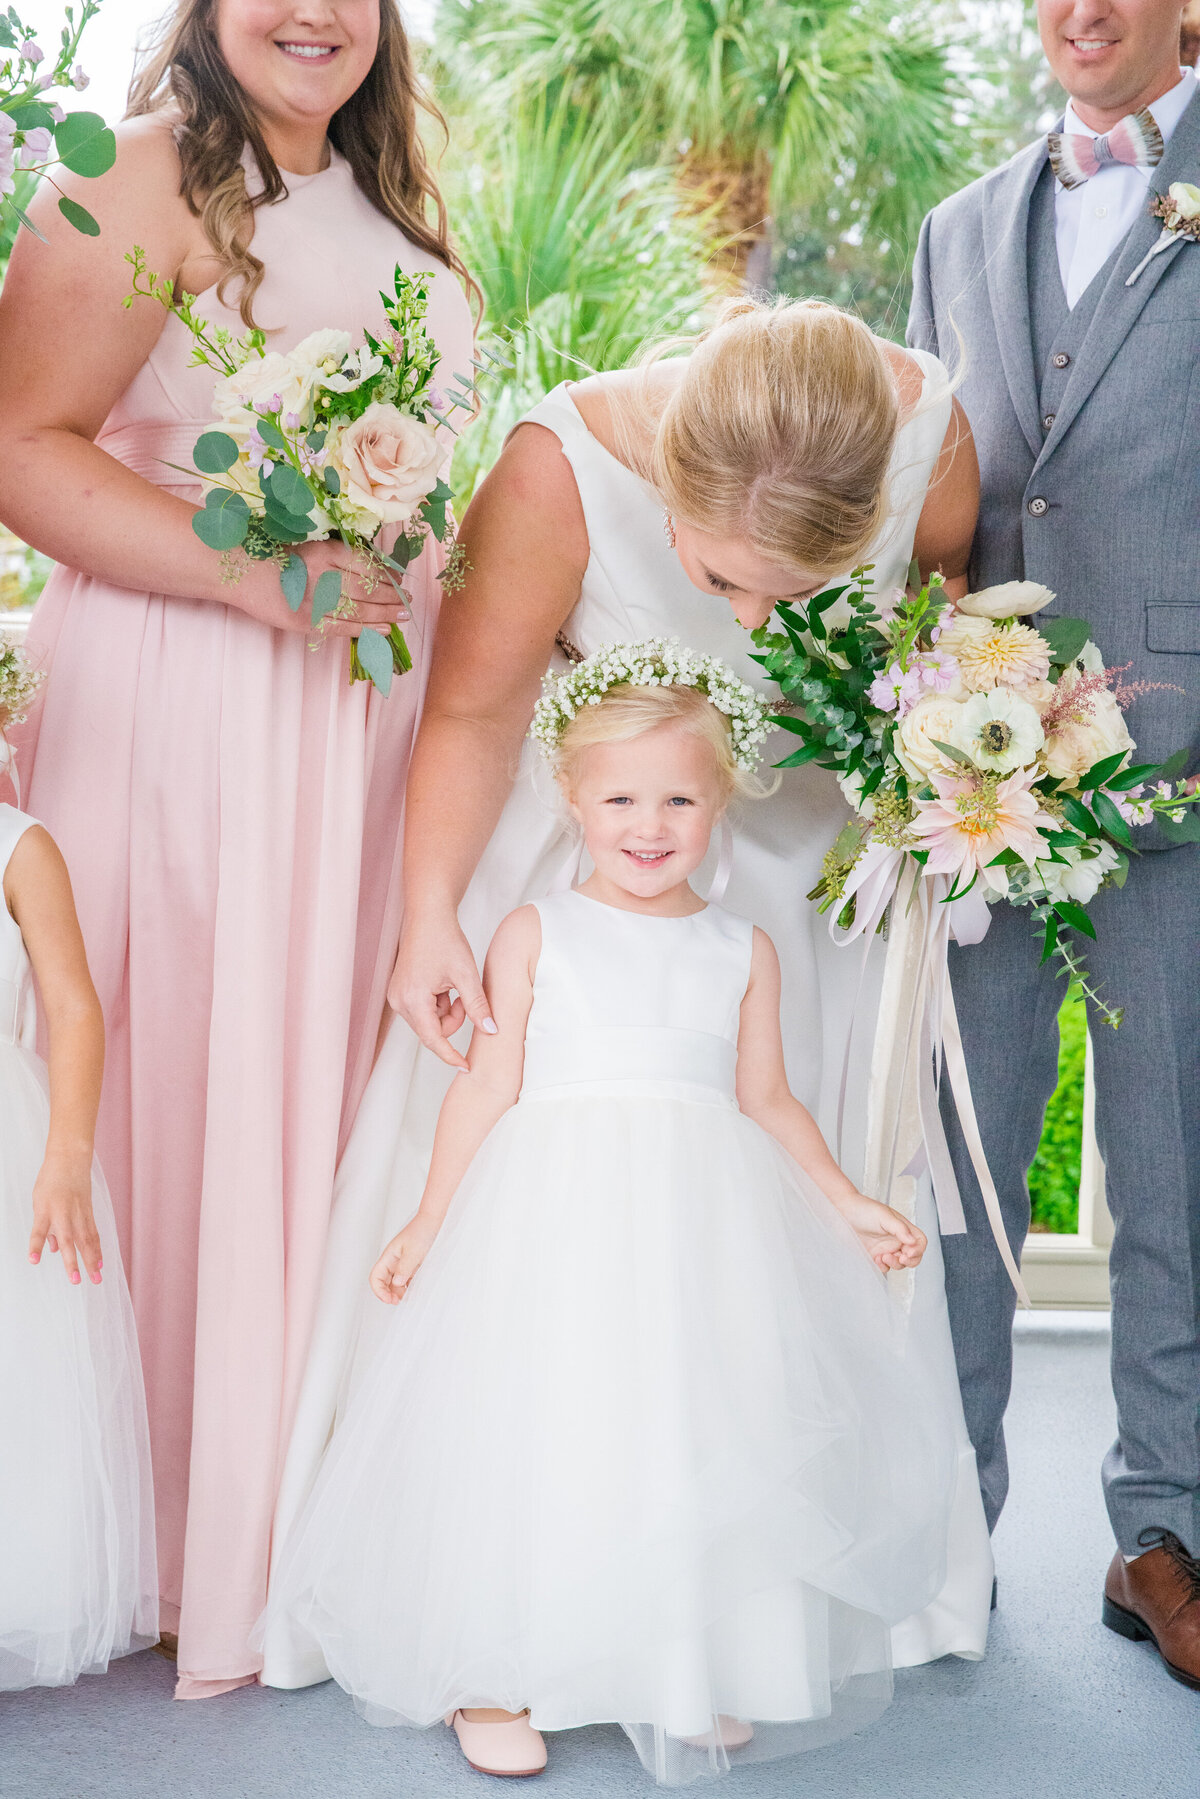 flower girl laughs and looks at the camera while bride looks on